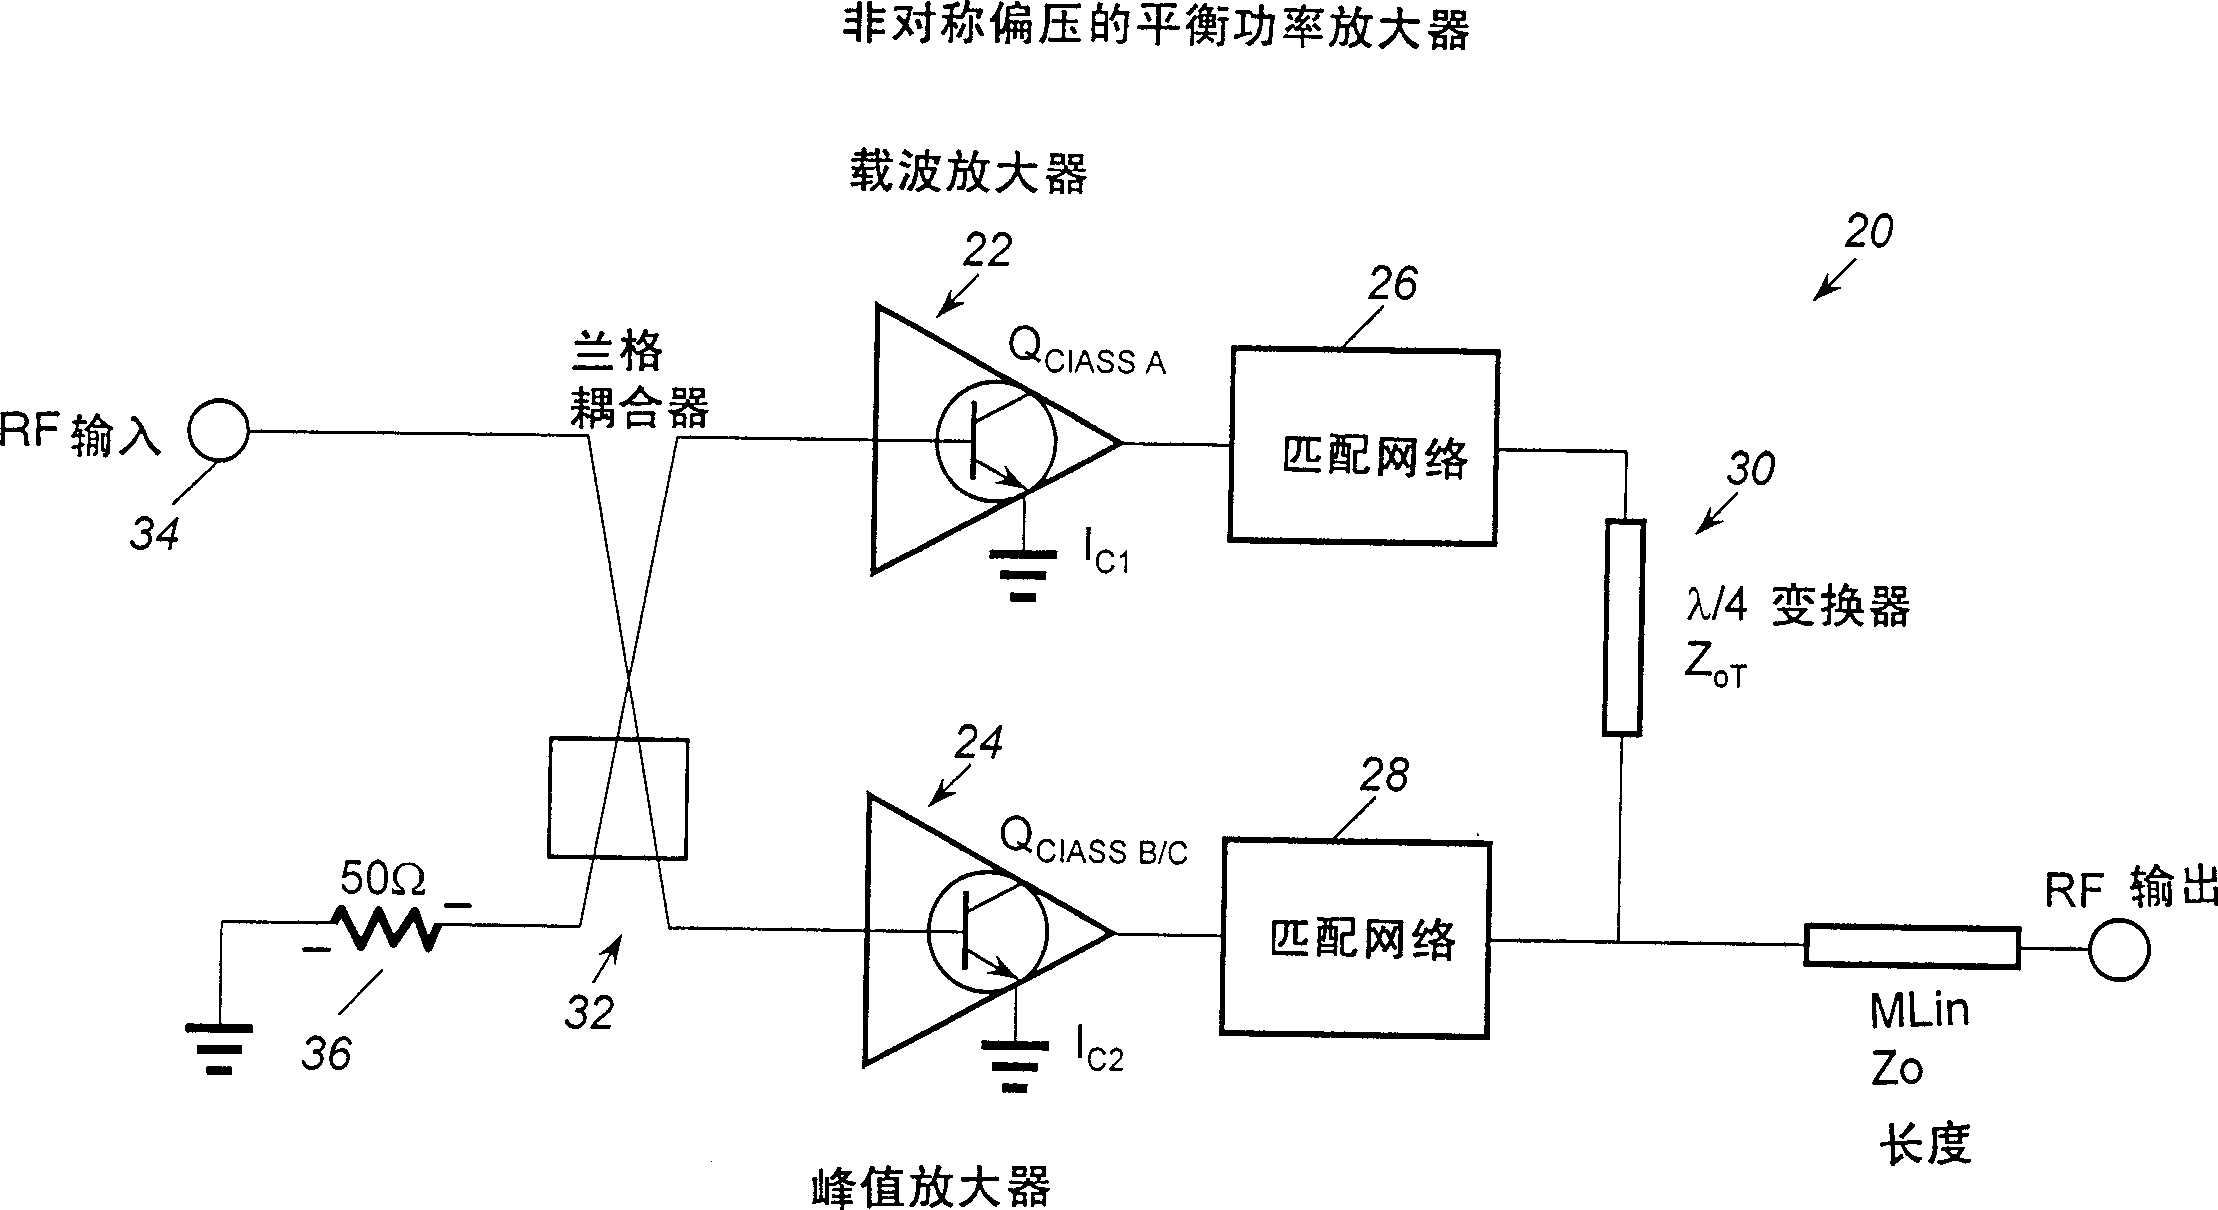 Predistortion circuit for Doherty linear microwave amplifier